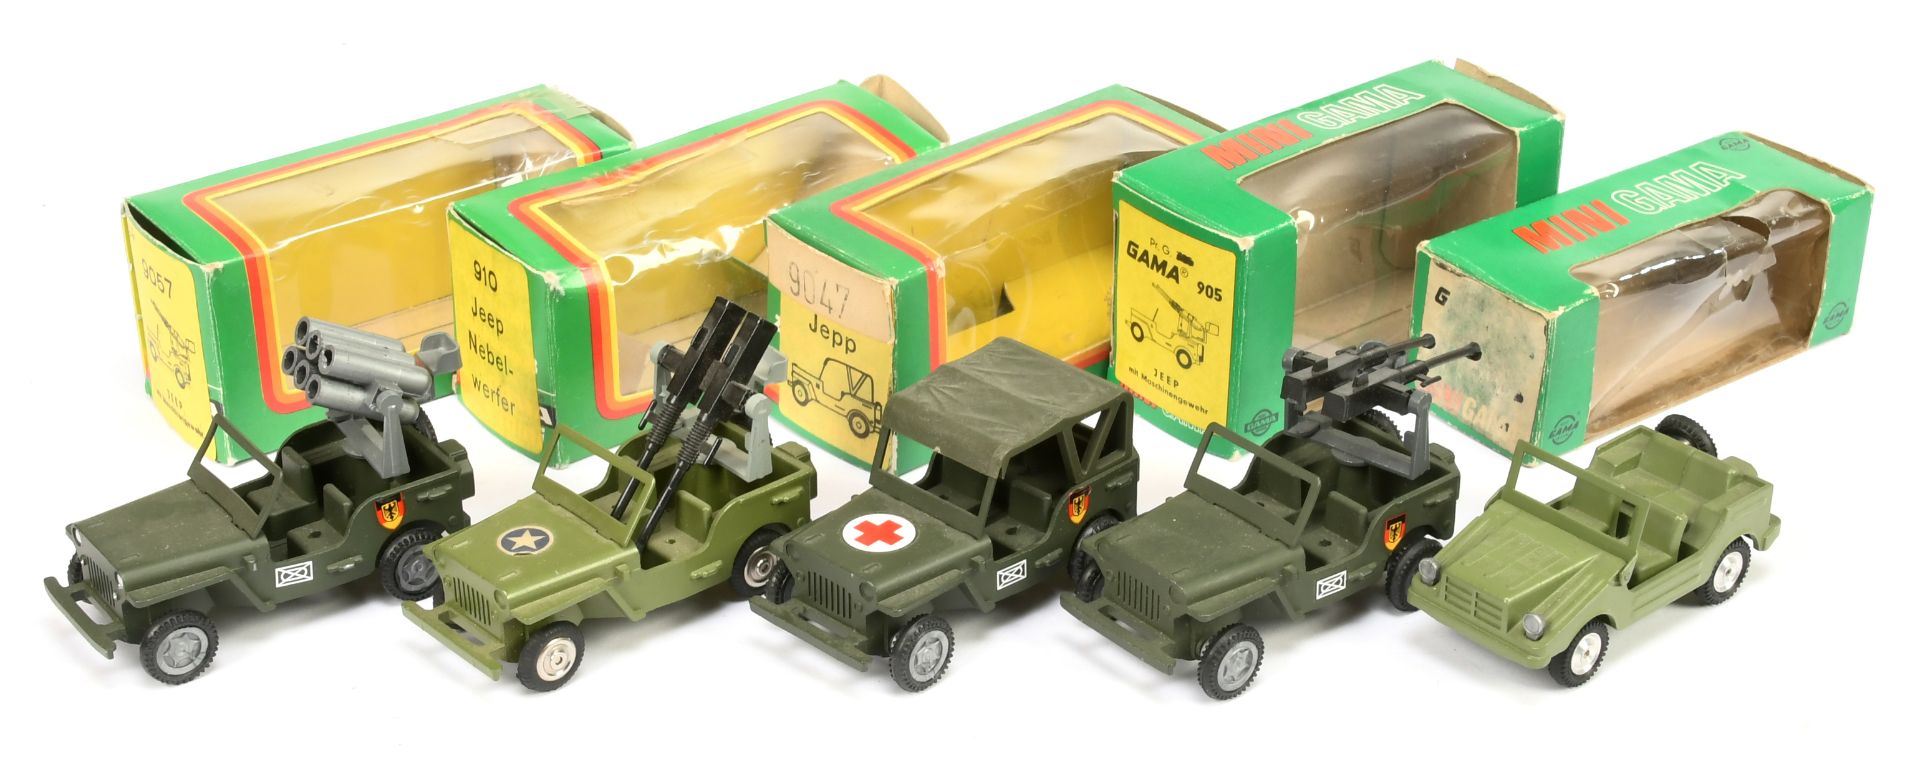 Gama Military Jeeps group of  to include 9047 "Ambulance", 910 Rocket Launcher plus others